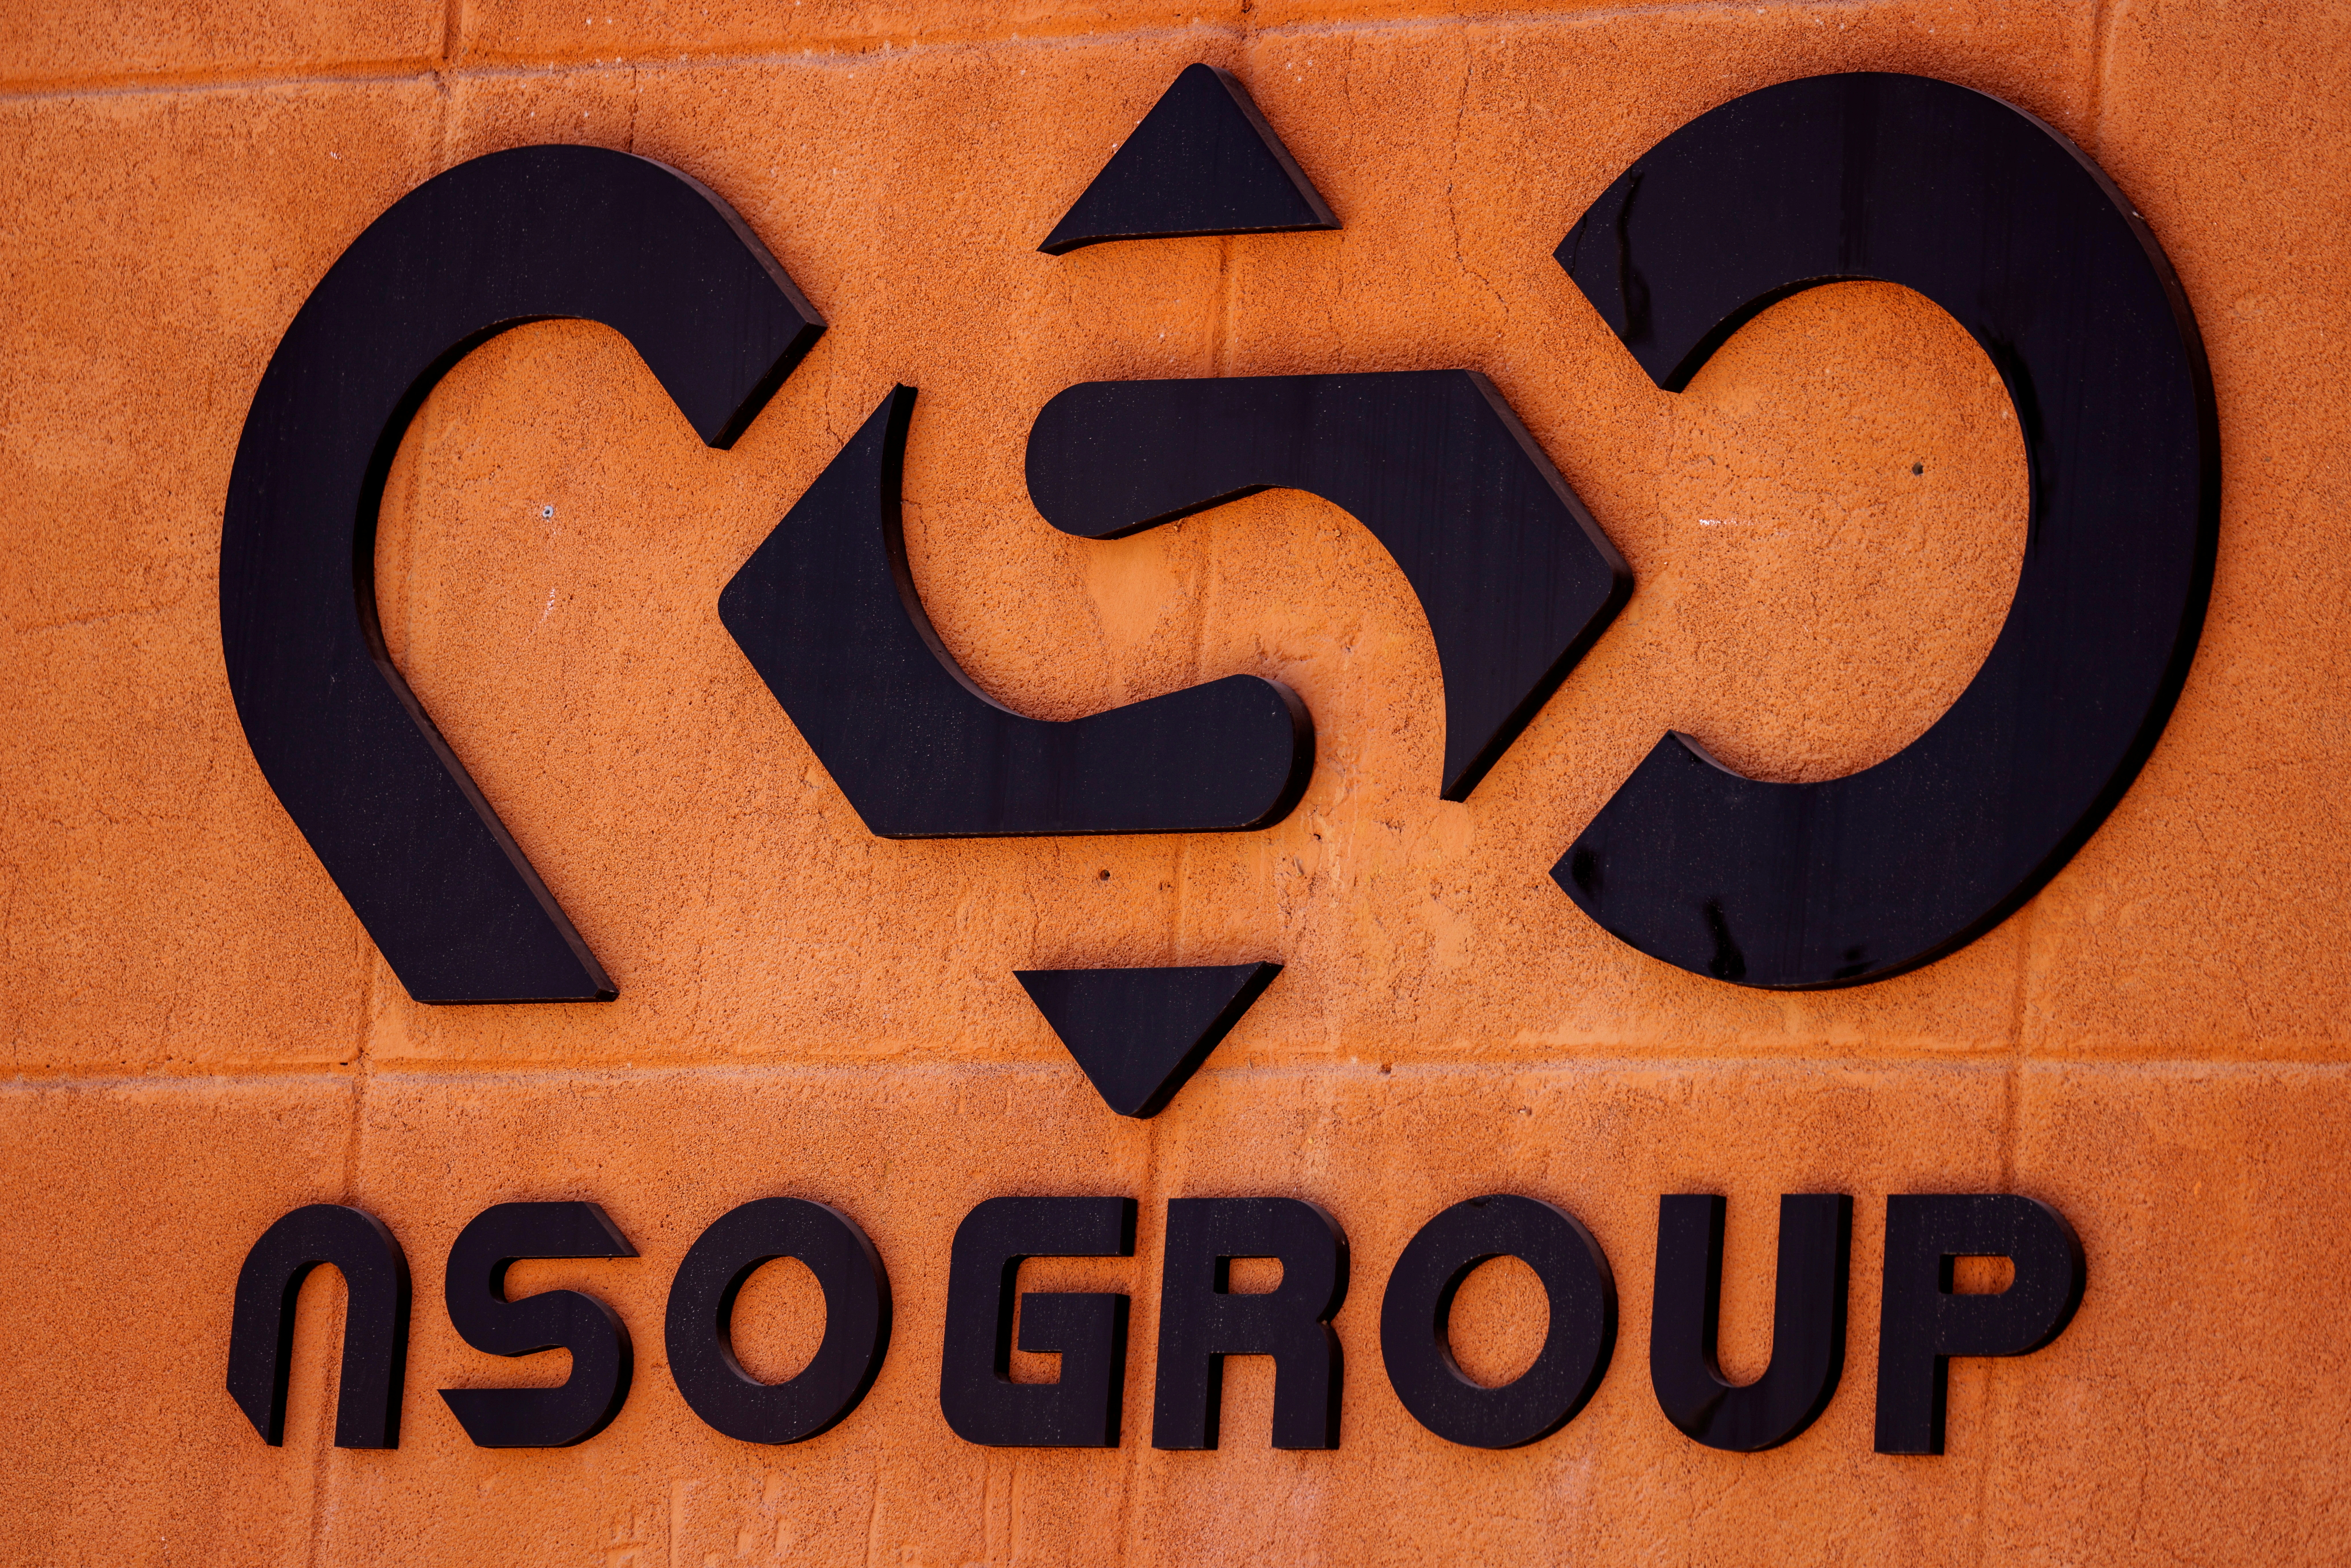 The logo of Israeli cyber firm NSO Group is seen at one of its branches in the Arava Desert, southern Israel July 22, 2021. REUTERS/Amir Cohen/File Photo